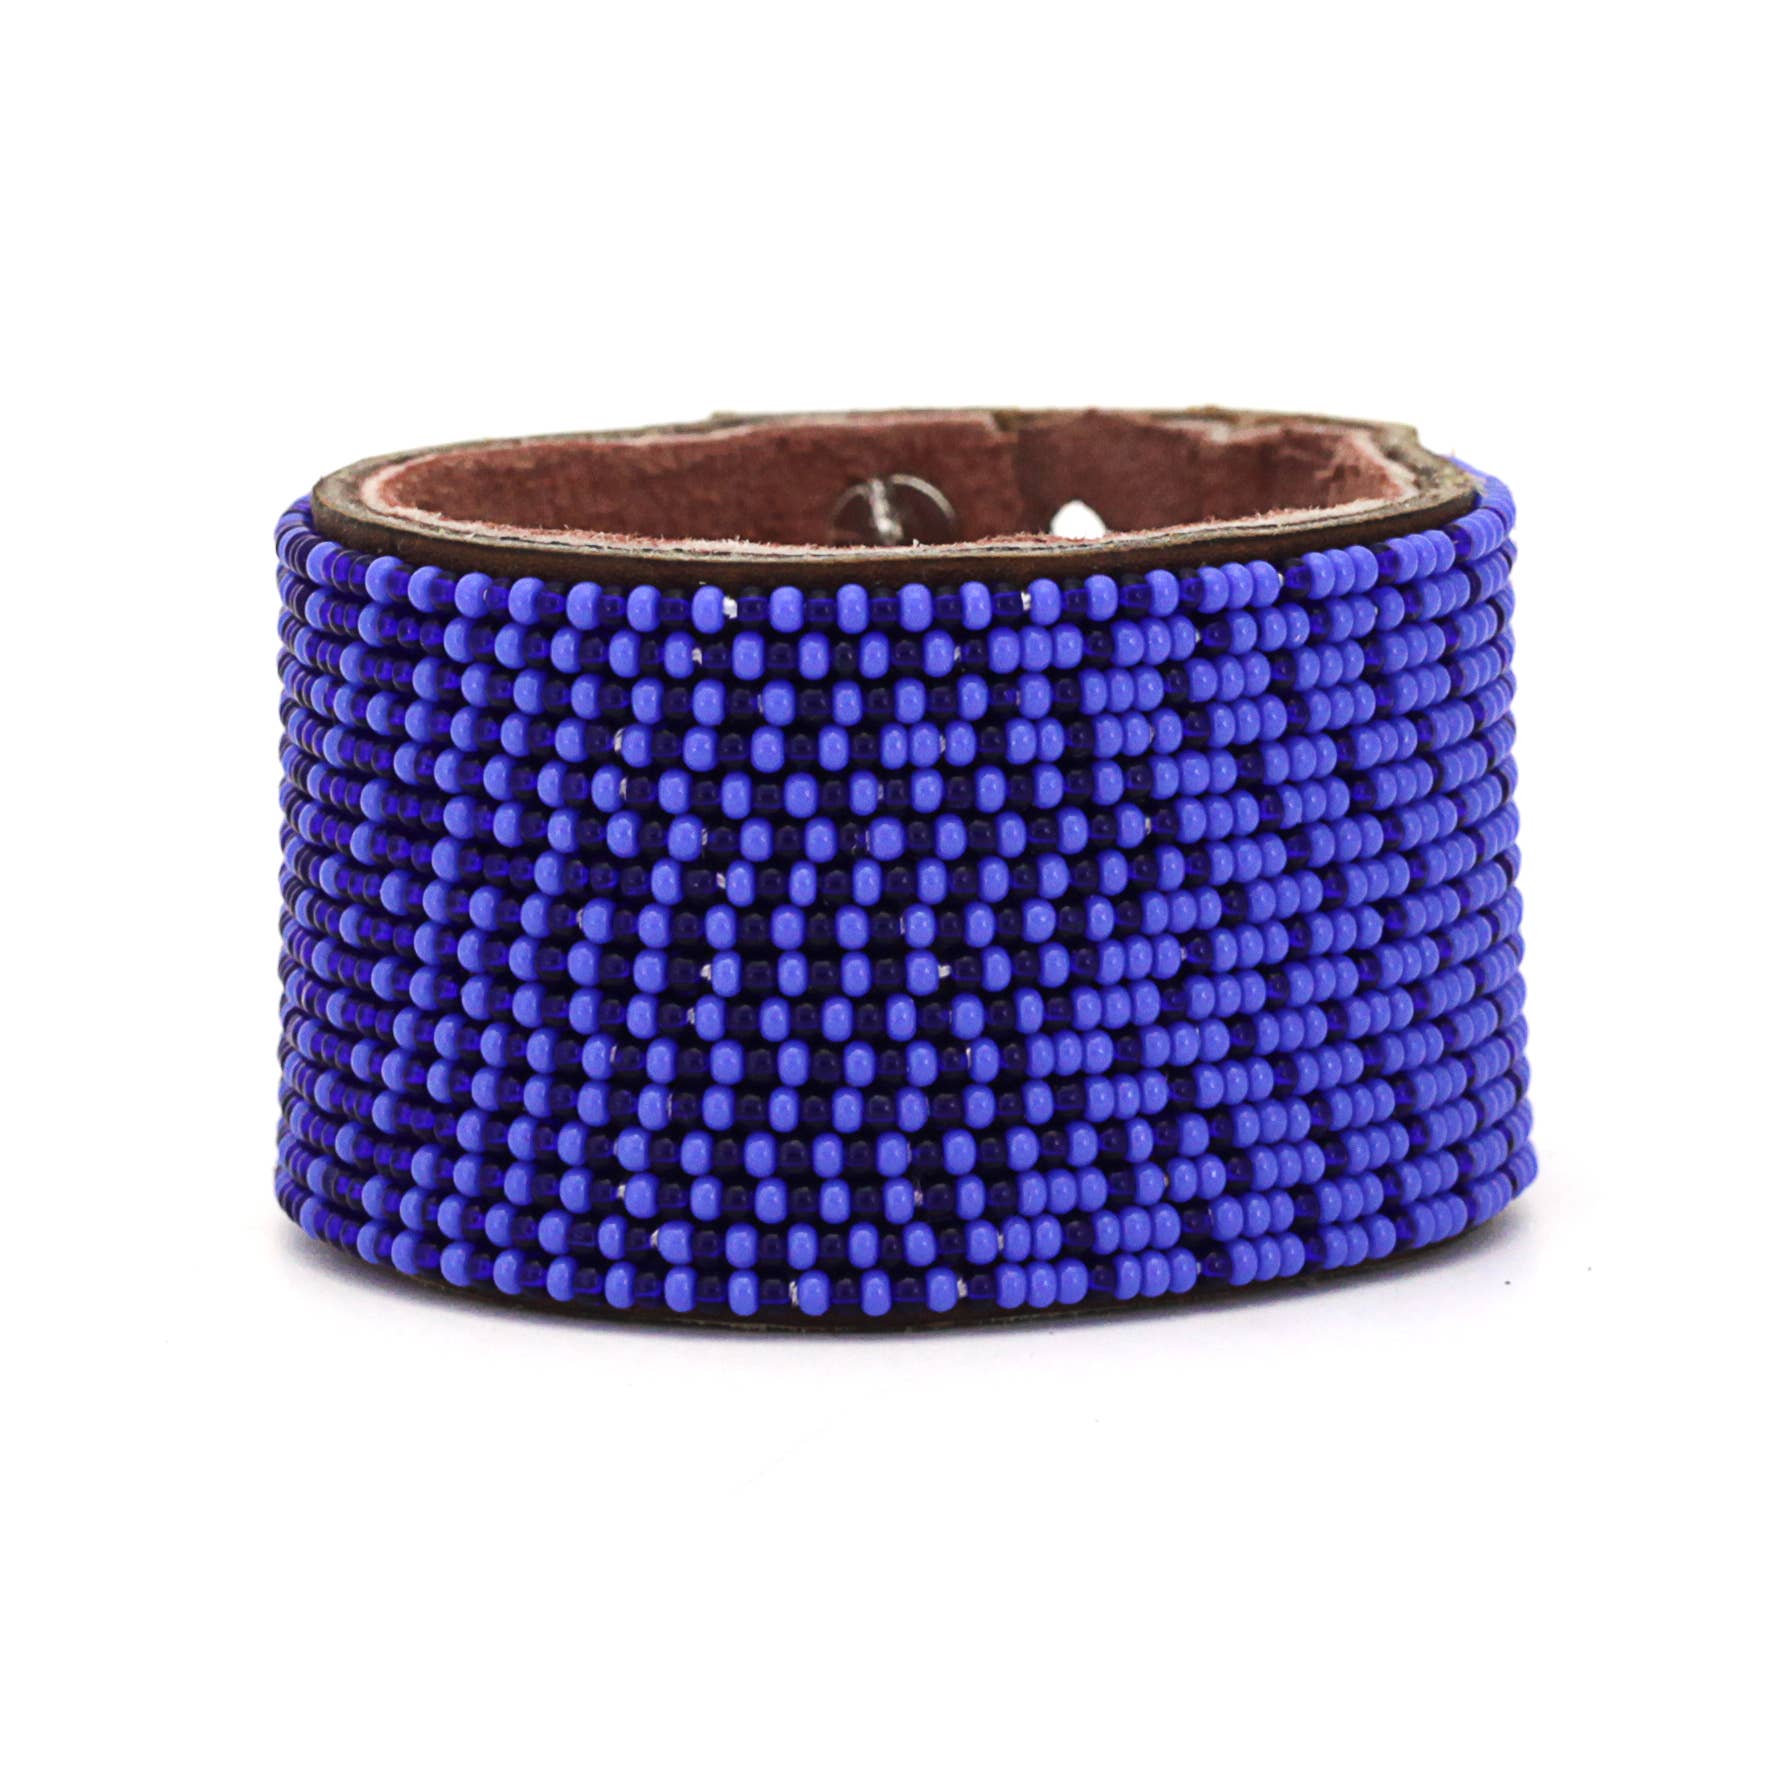 Large Dark Blue and Ocean Blue Ombre Leather Cuff